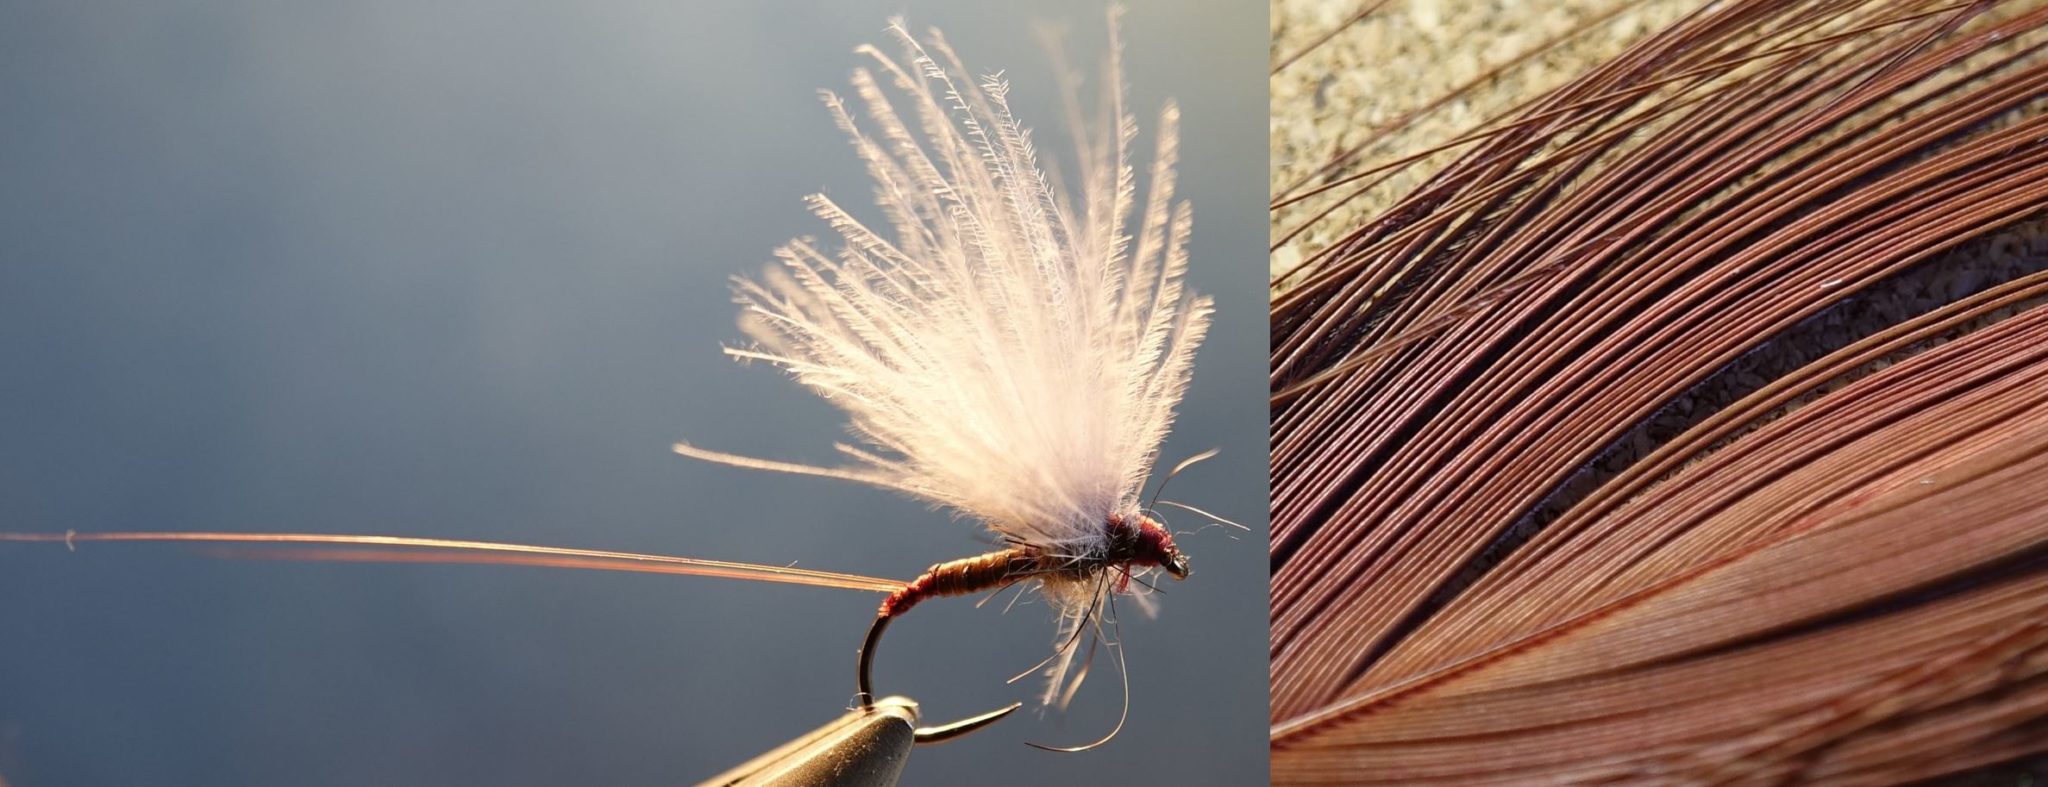 herl quill paon peacock flytying fly tying mouche teinture coloring dye eclosion ecdyonaurus olive ignita